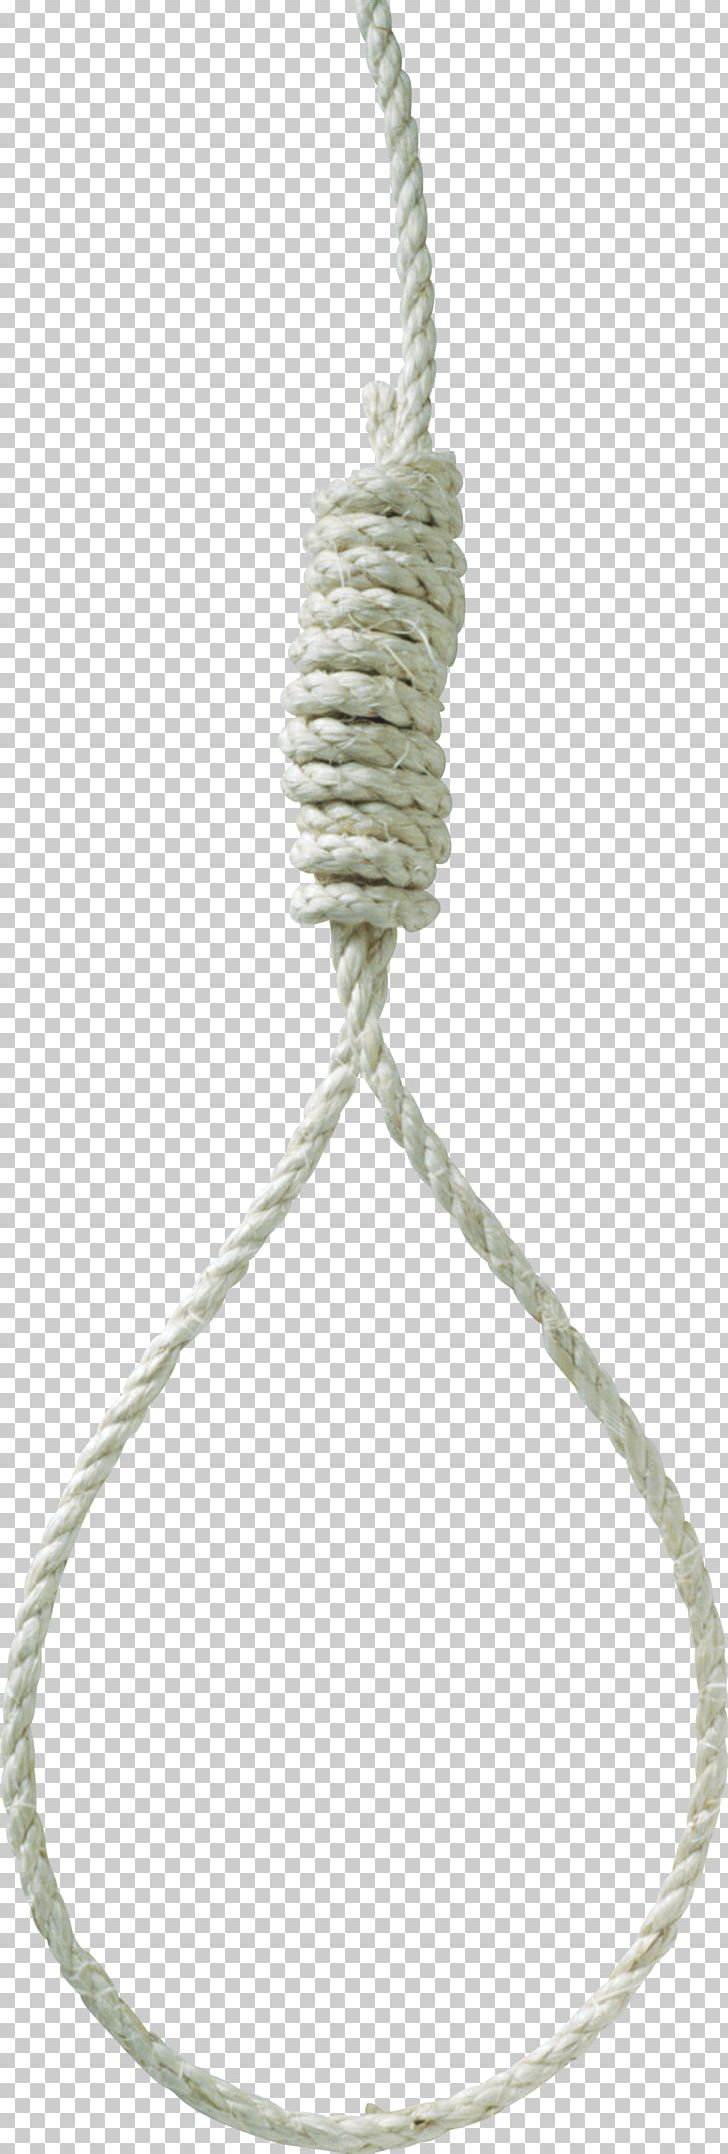 Rope PNG, Clipart, Rope Free PNG Download